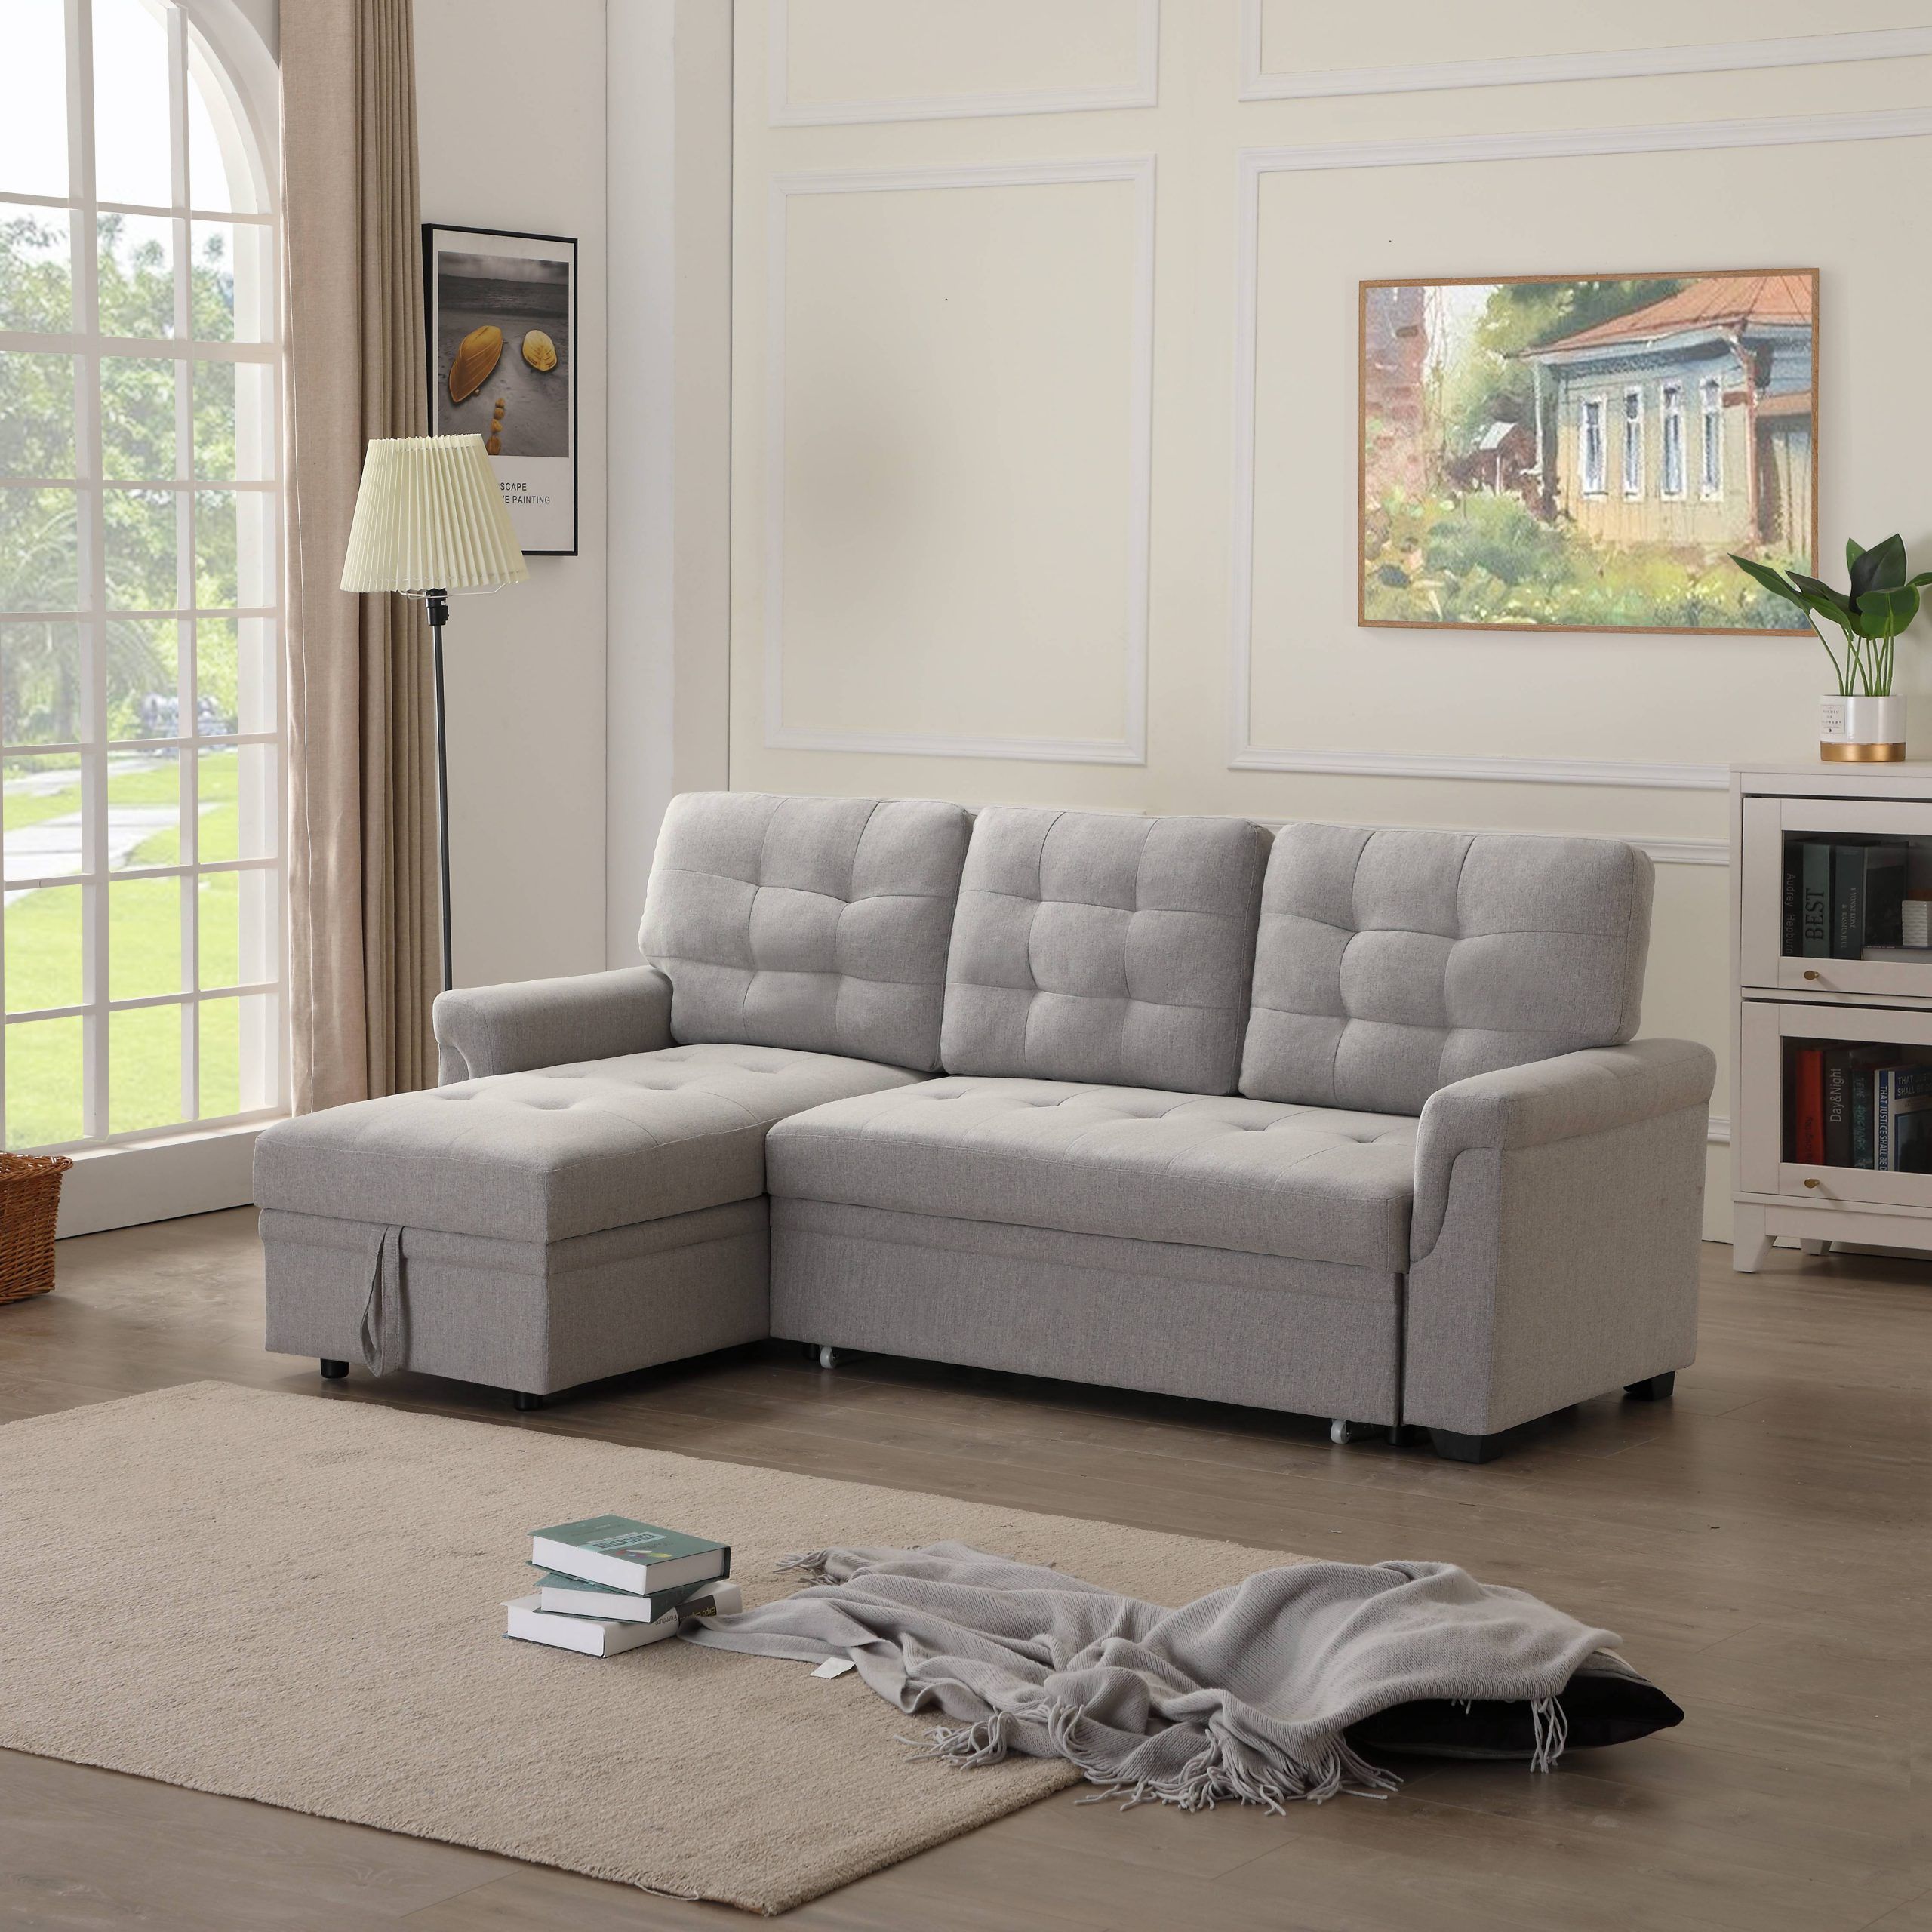 86"w Modern Sectional Sofa Bed With Reversible Chaise, L Throughout Easton Small Space Sectional Futon Sofas (View 11 of 15)